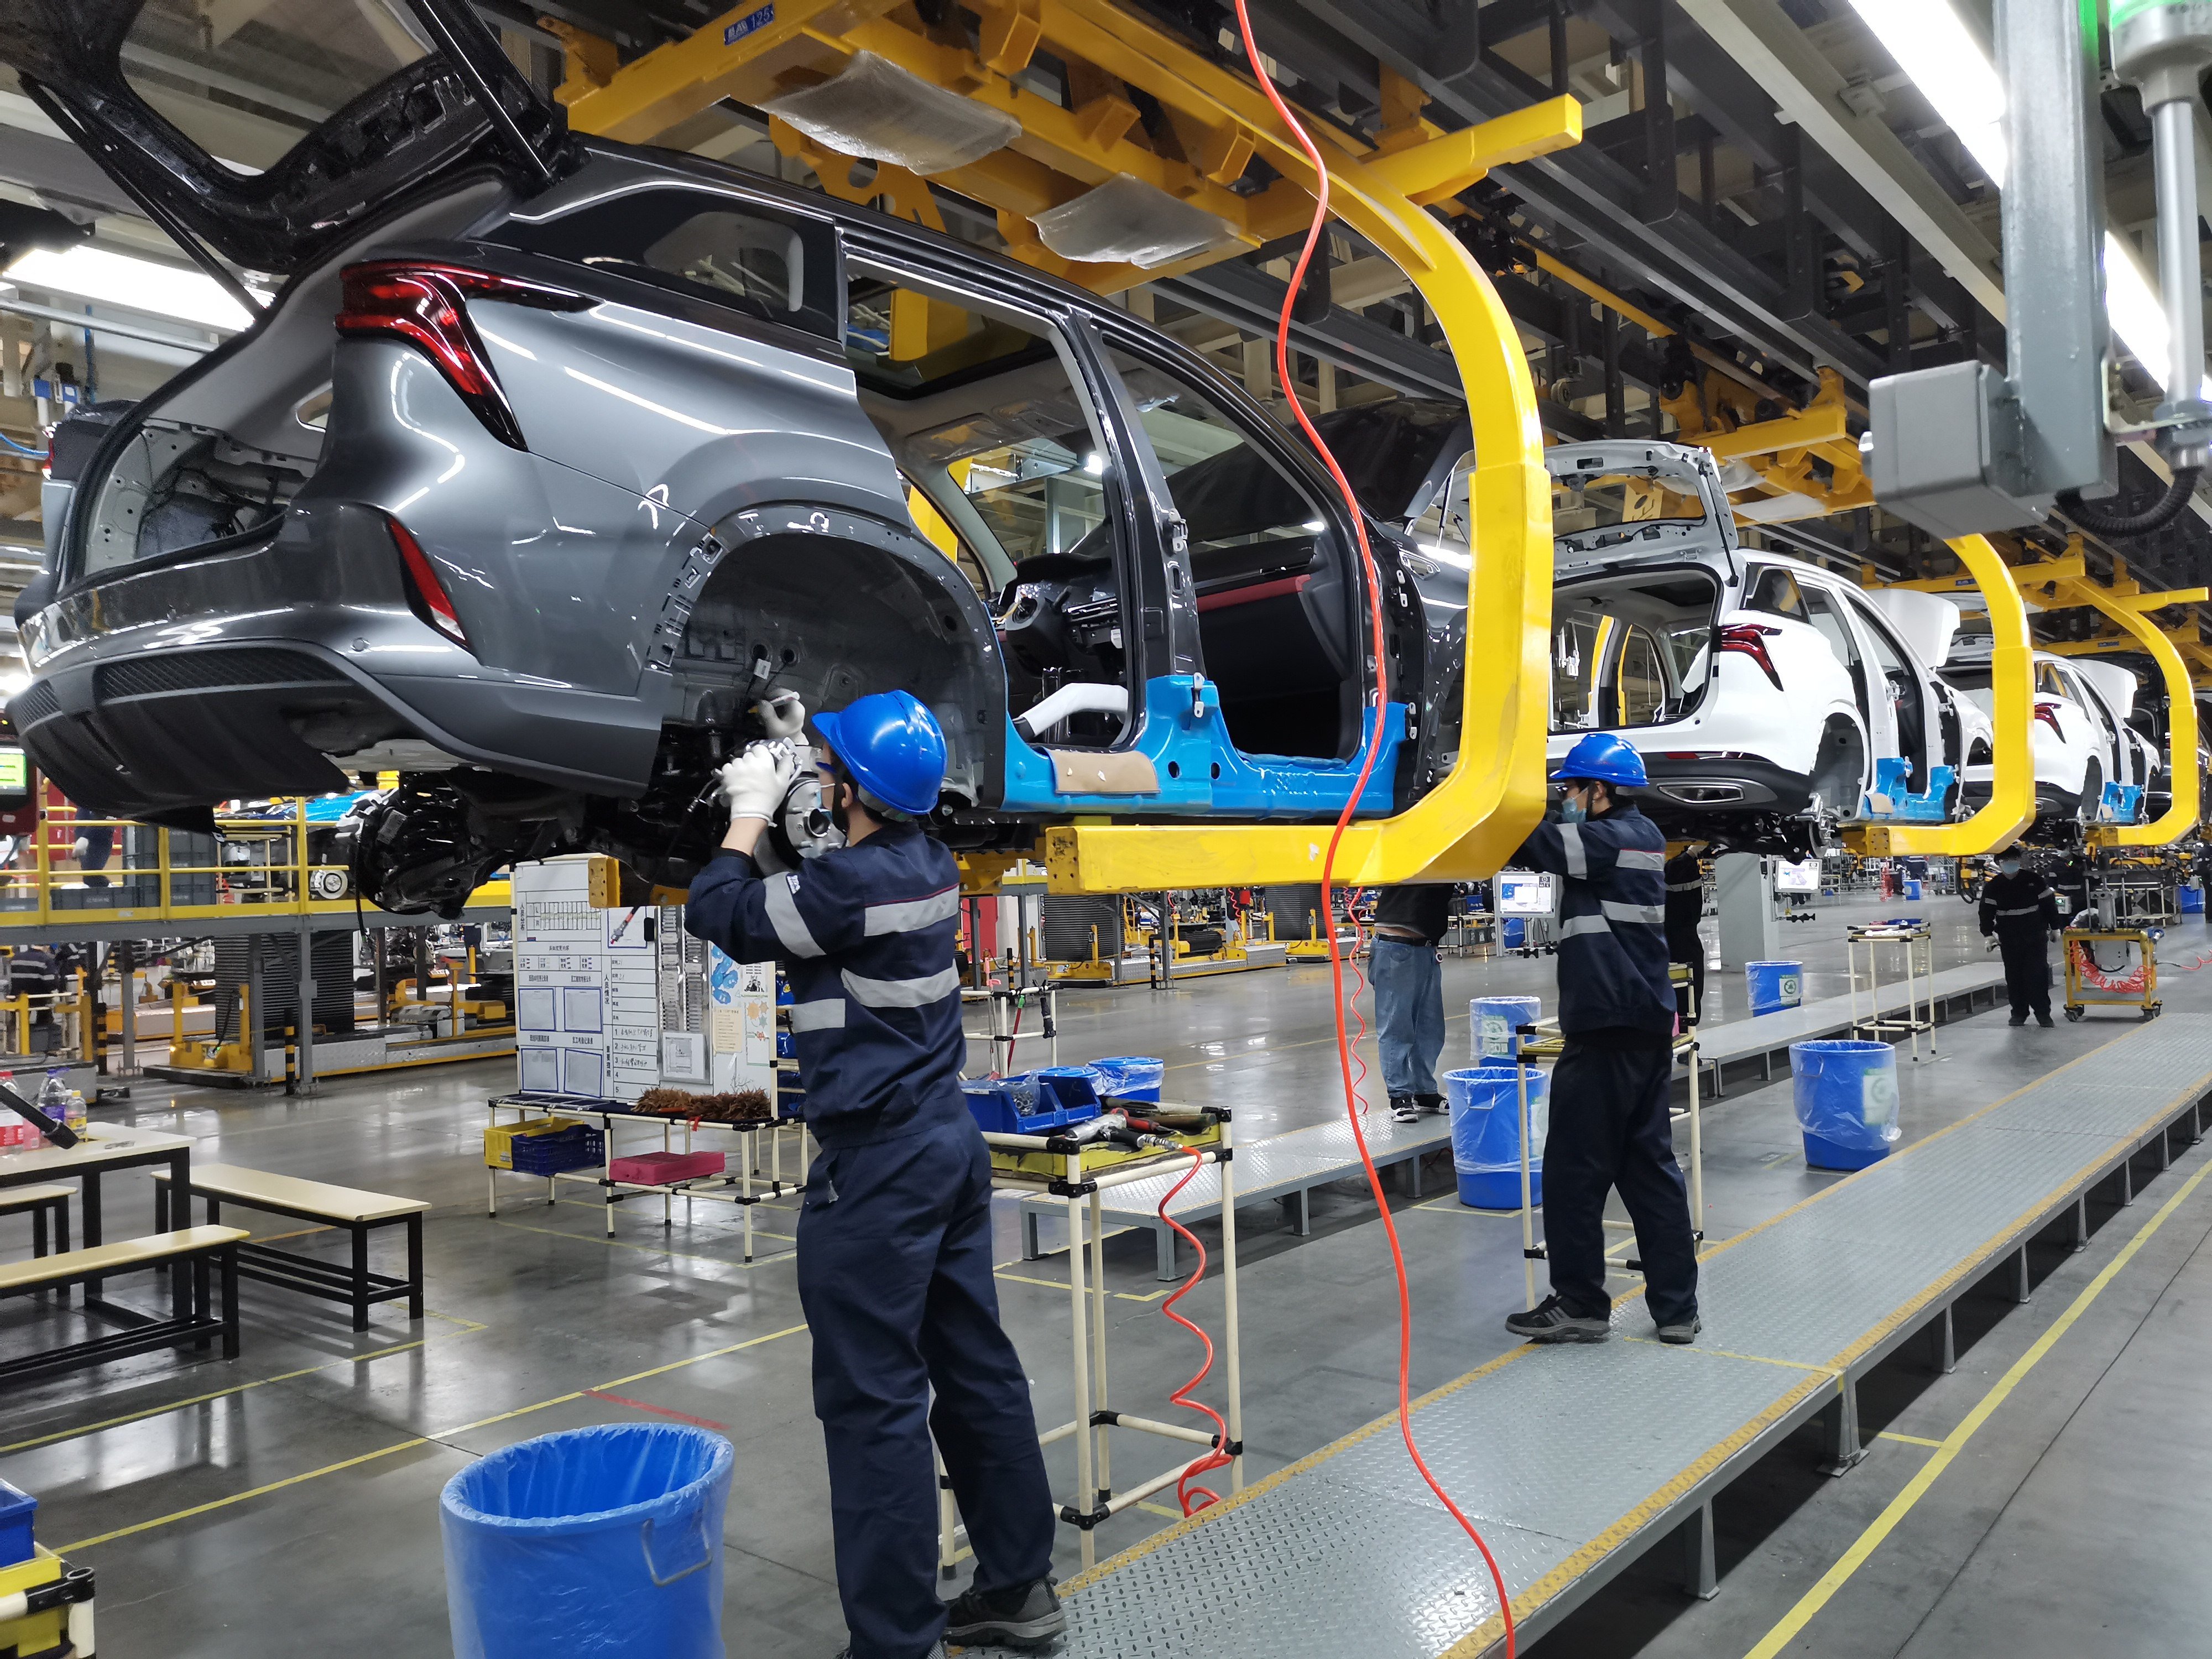 A Changan production line in Hefei, in China’s eastern Anhui province. The carmaker has not announced a location for its facility in Thailand yet. Photo: Xinhua